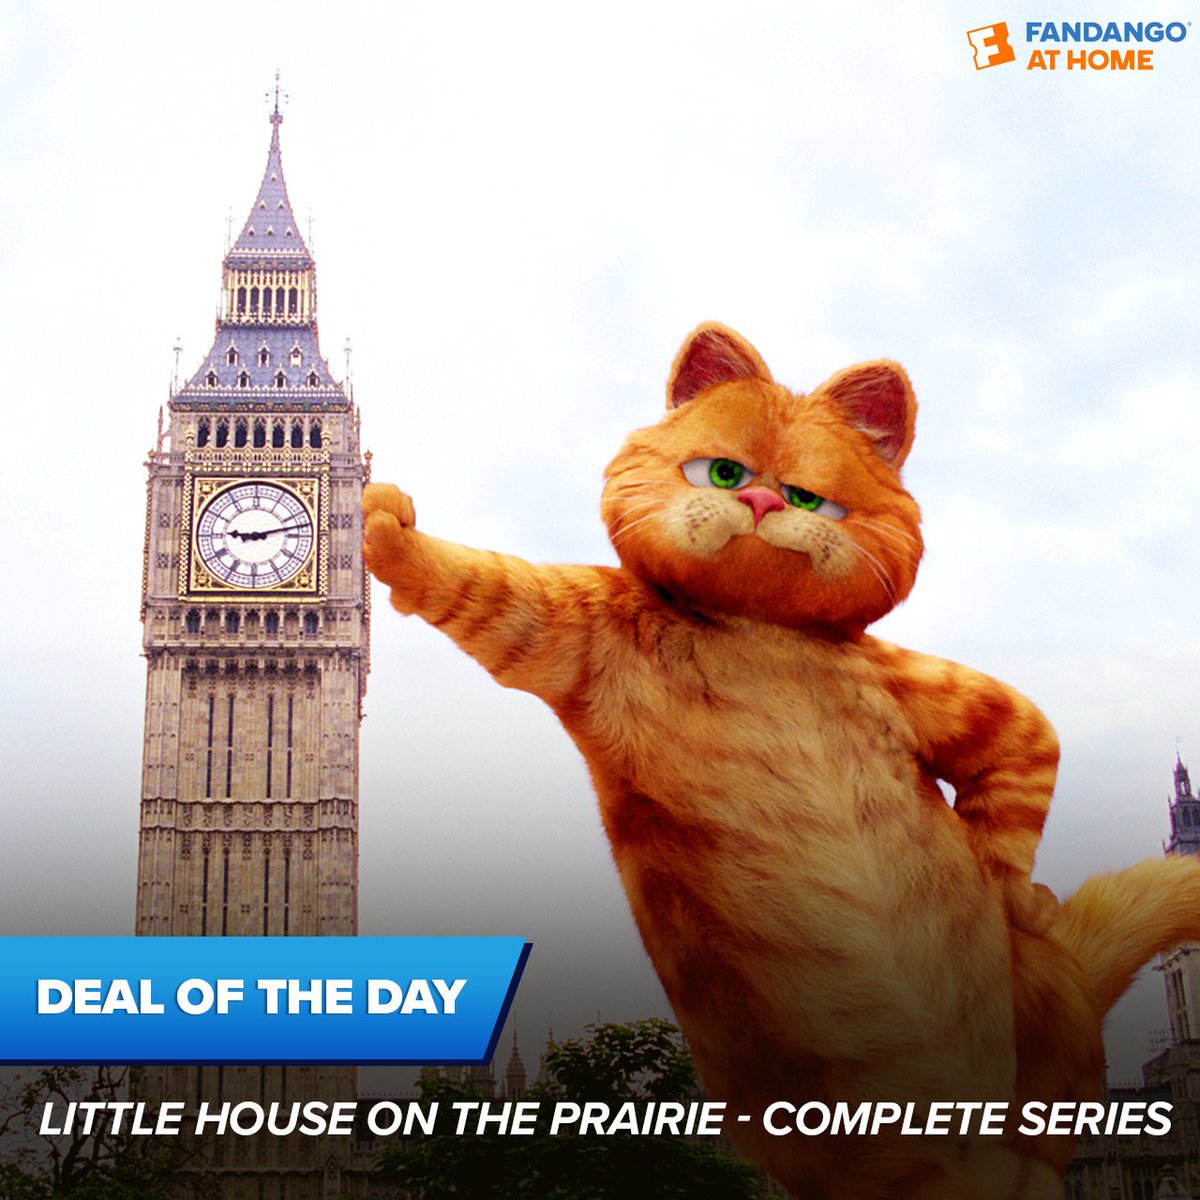 Get ready for #Garfield on the big screen with today's deal. Get 2 Garfield movies on sale on Fandango at Home today! fandan.co/Garfield2Movie…